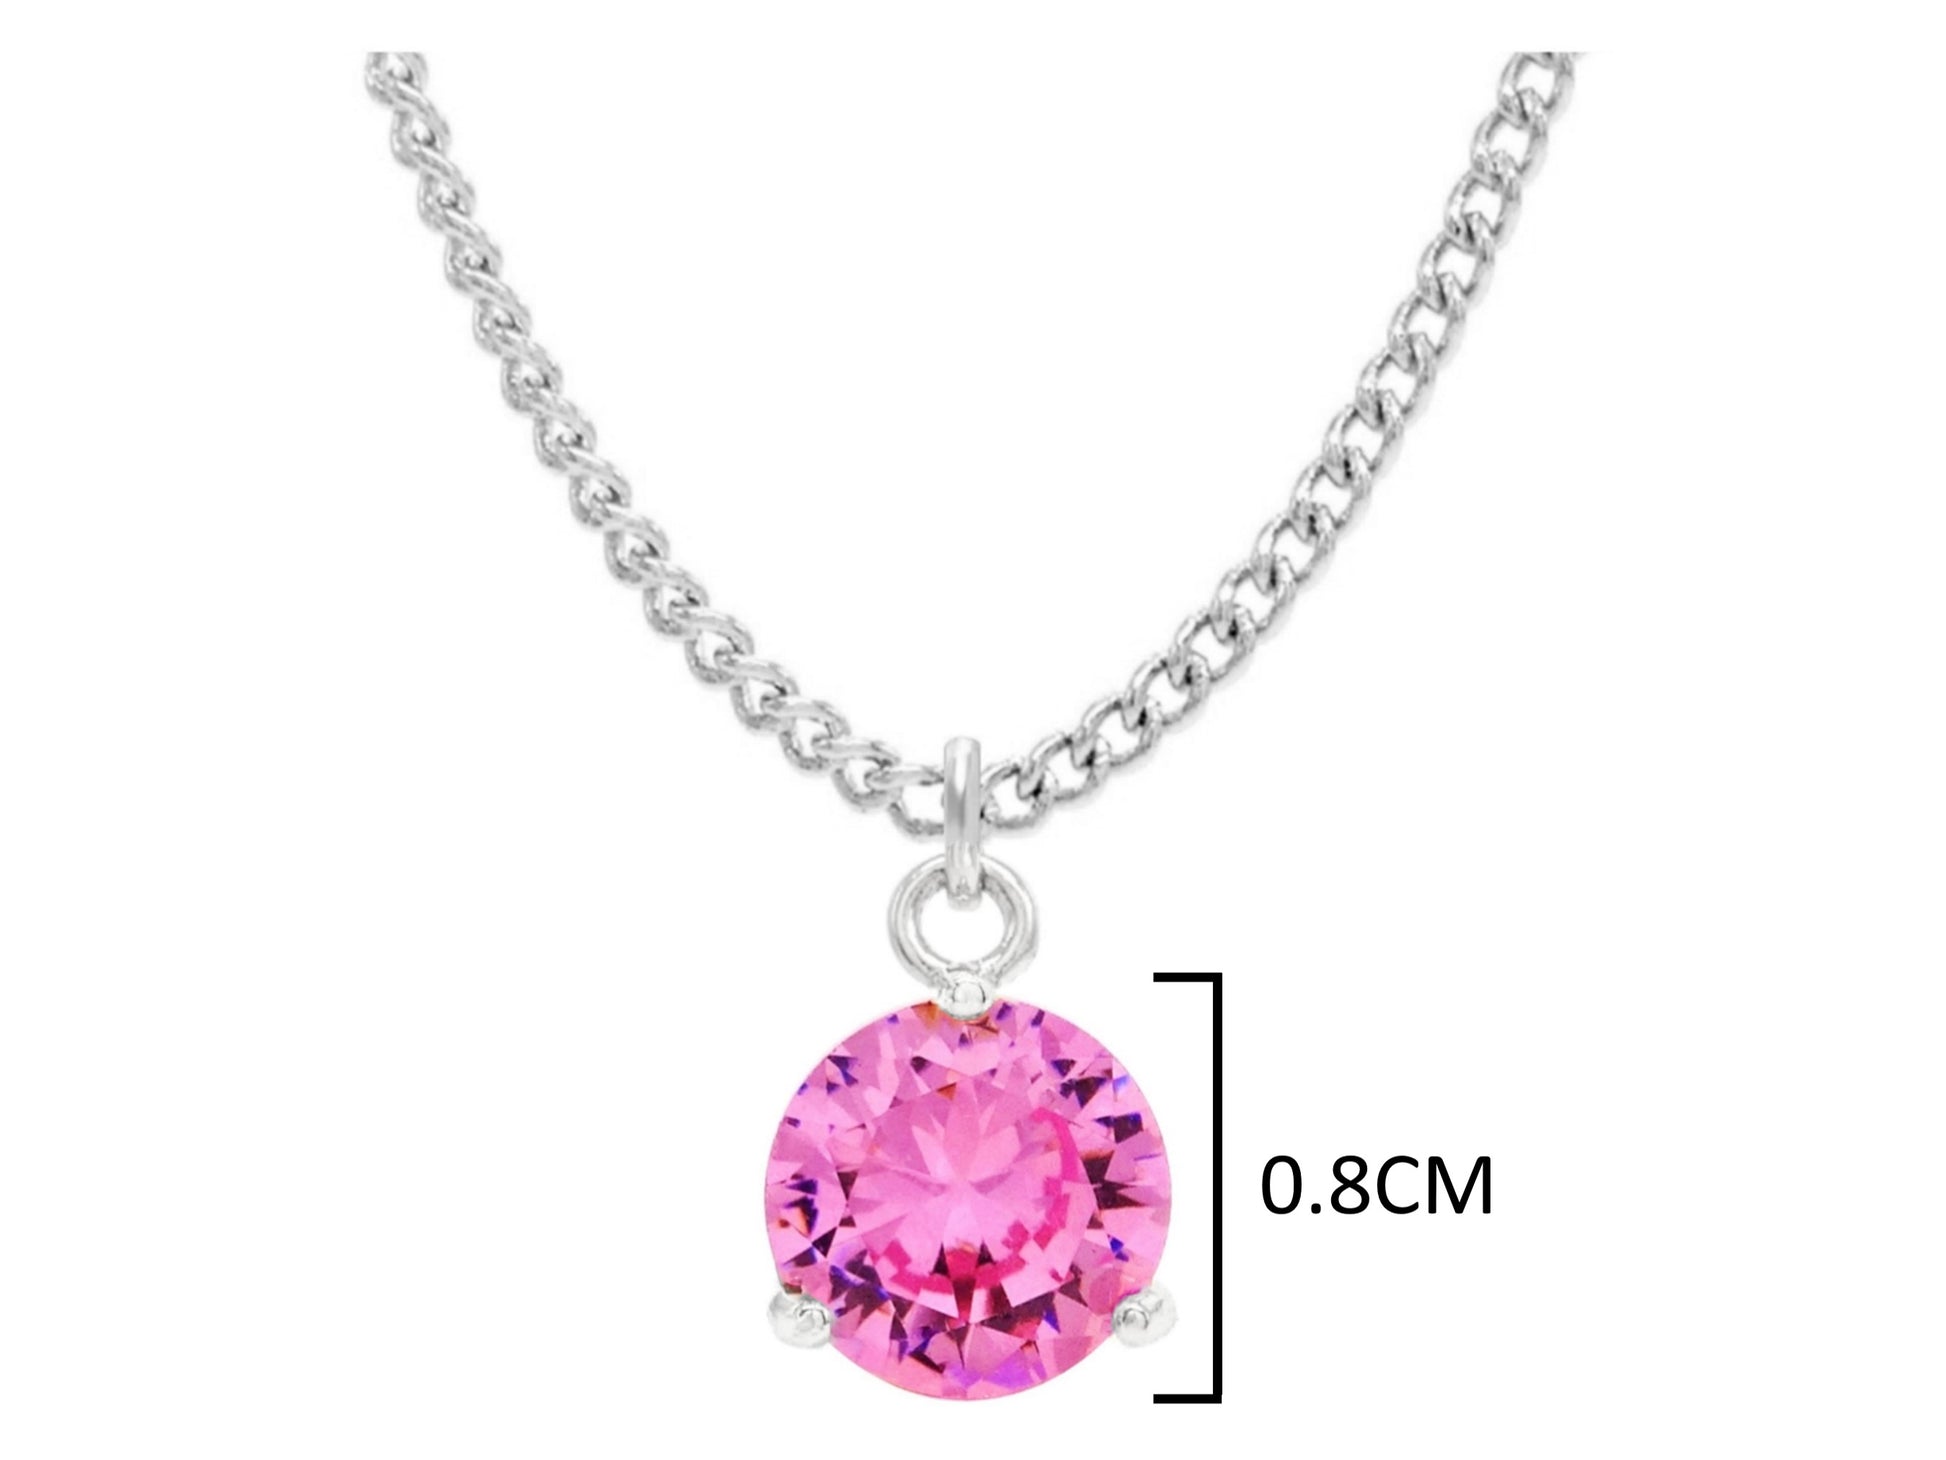 White gold pink round gem necklace and earrings MEASUREMENT